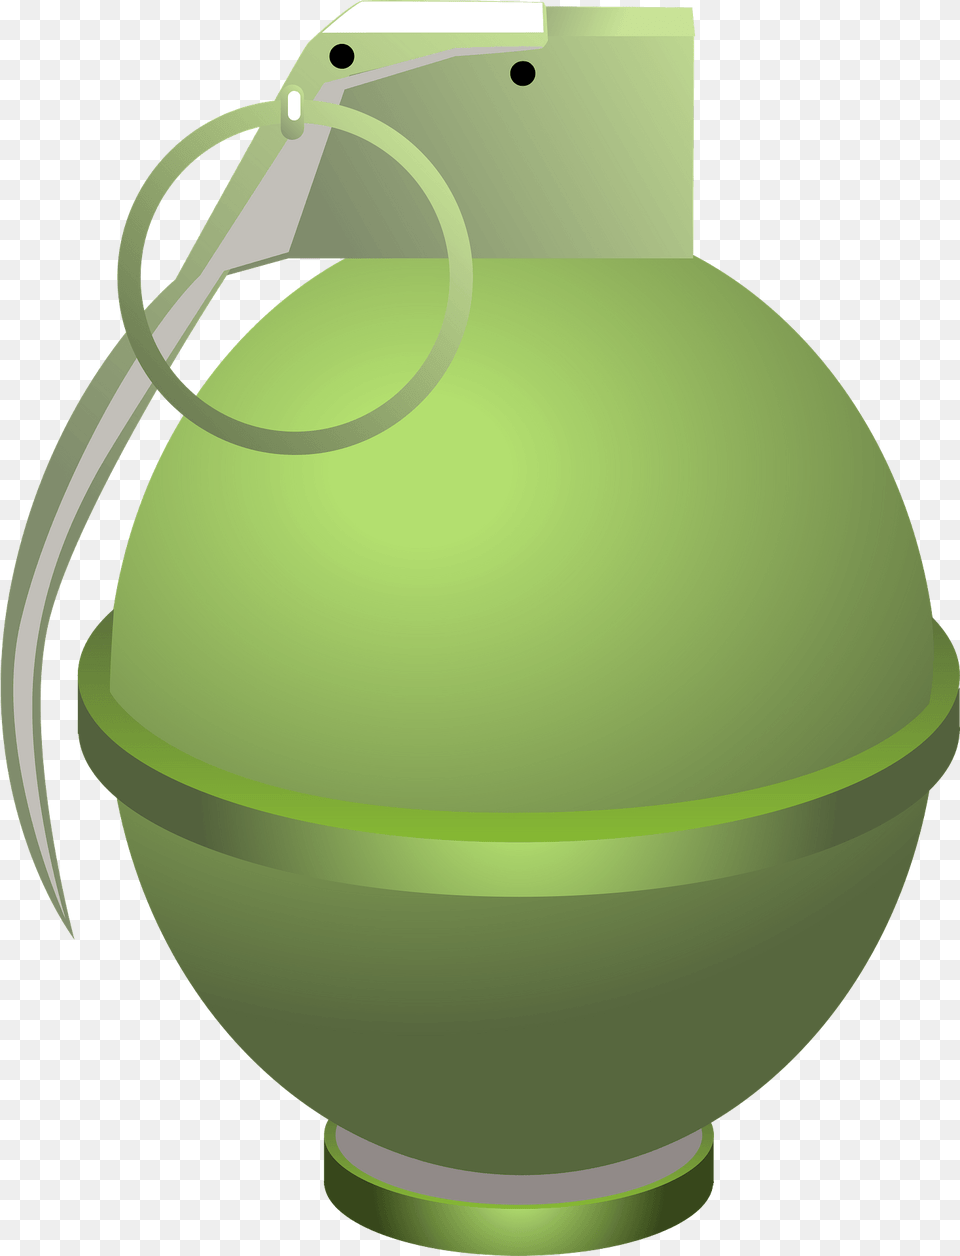 Grenade Bomb Clipart, Ammunition, Weapon Png Image